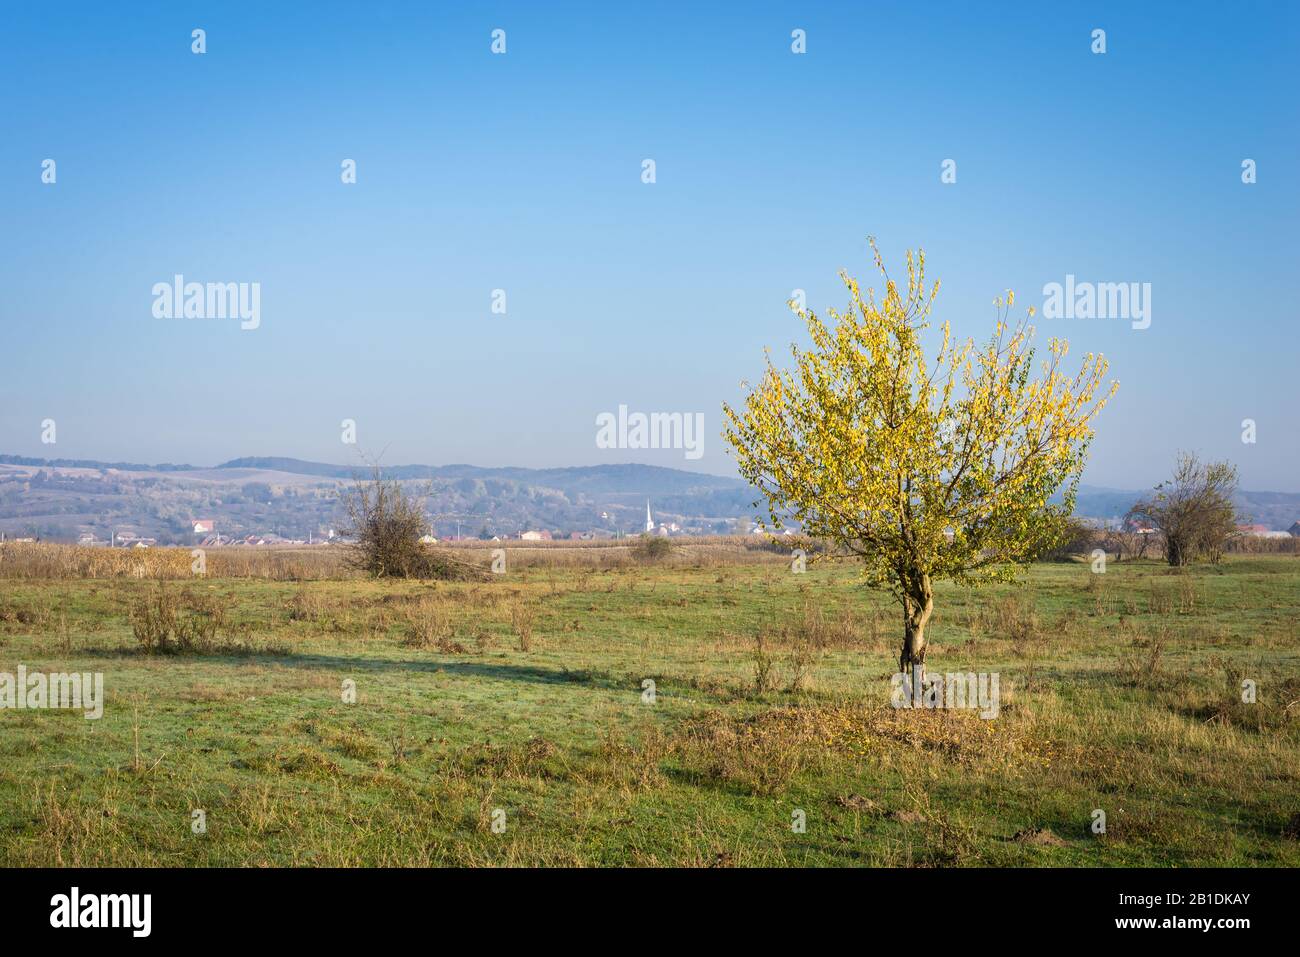 Lone tree with yellow autumn leaf color with a village and hills in background Stock Photo